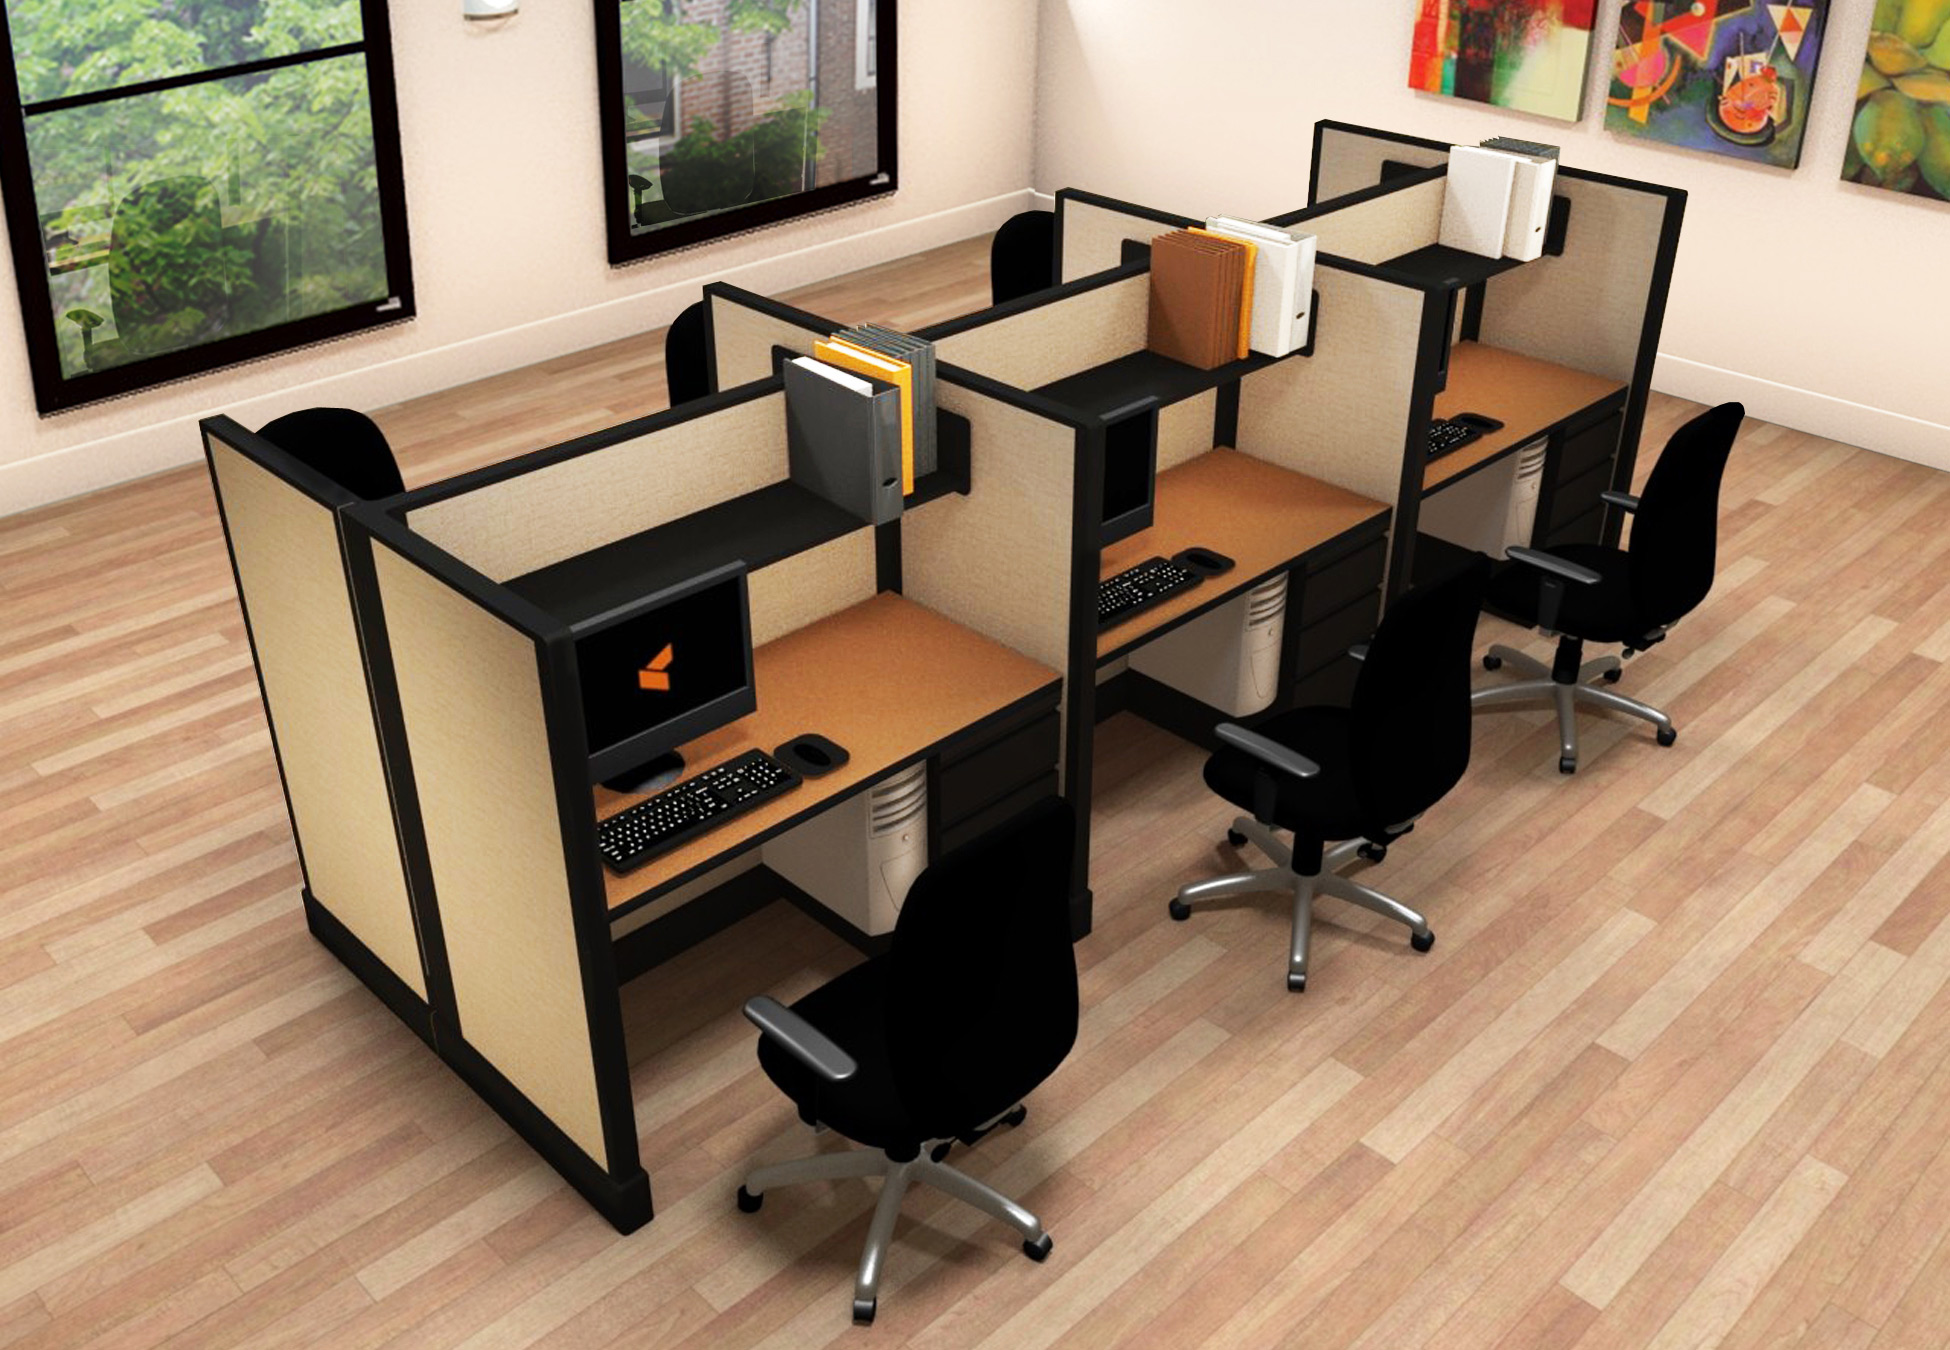 corporate-office-furniture-small-cubicles-2x4x53